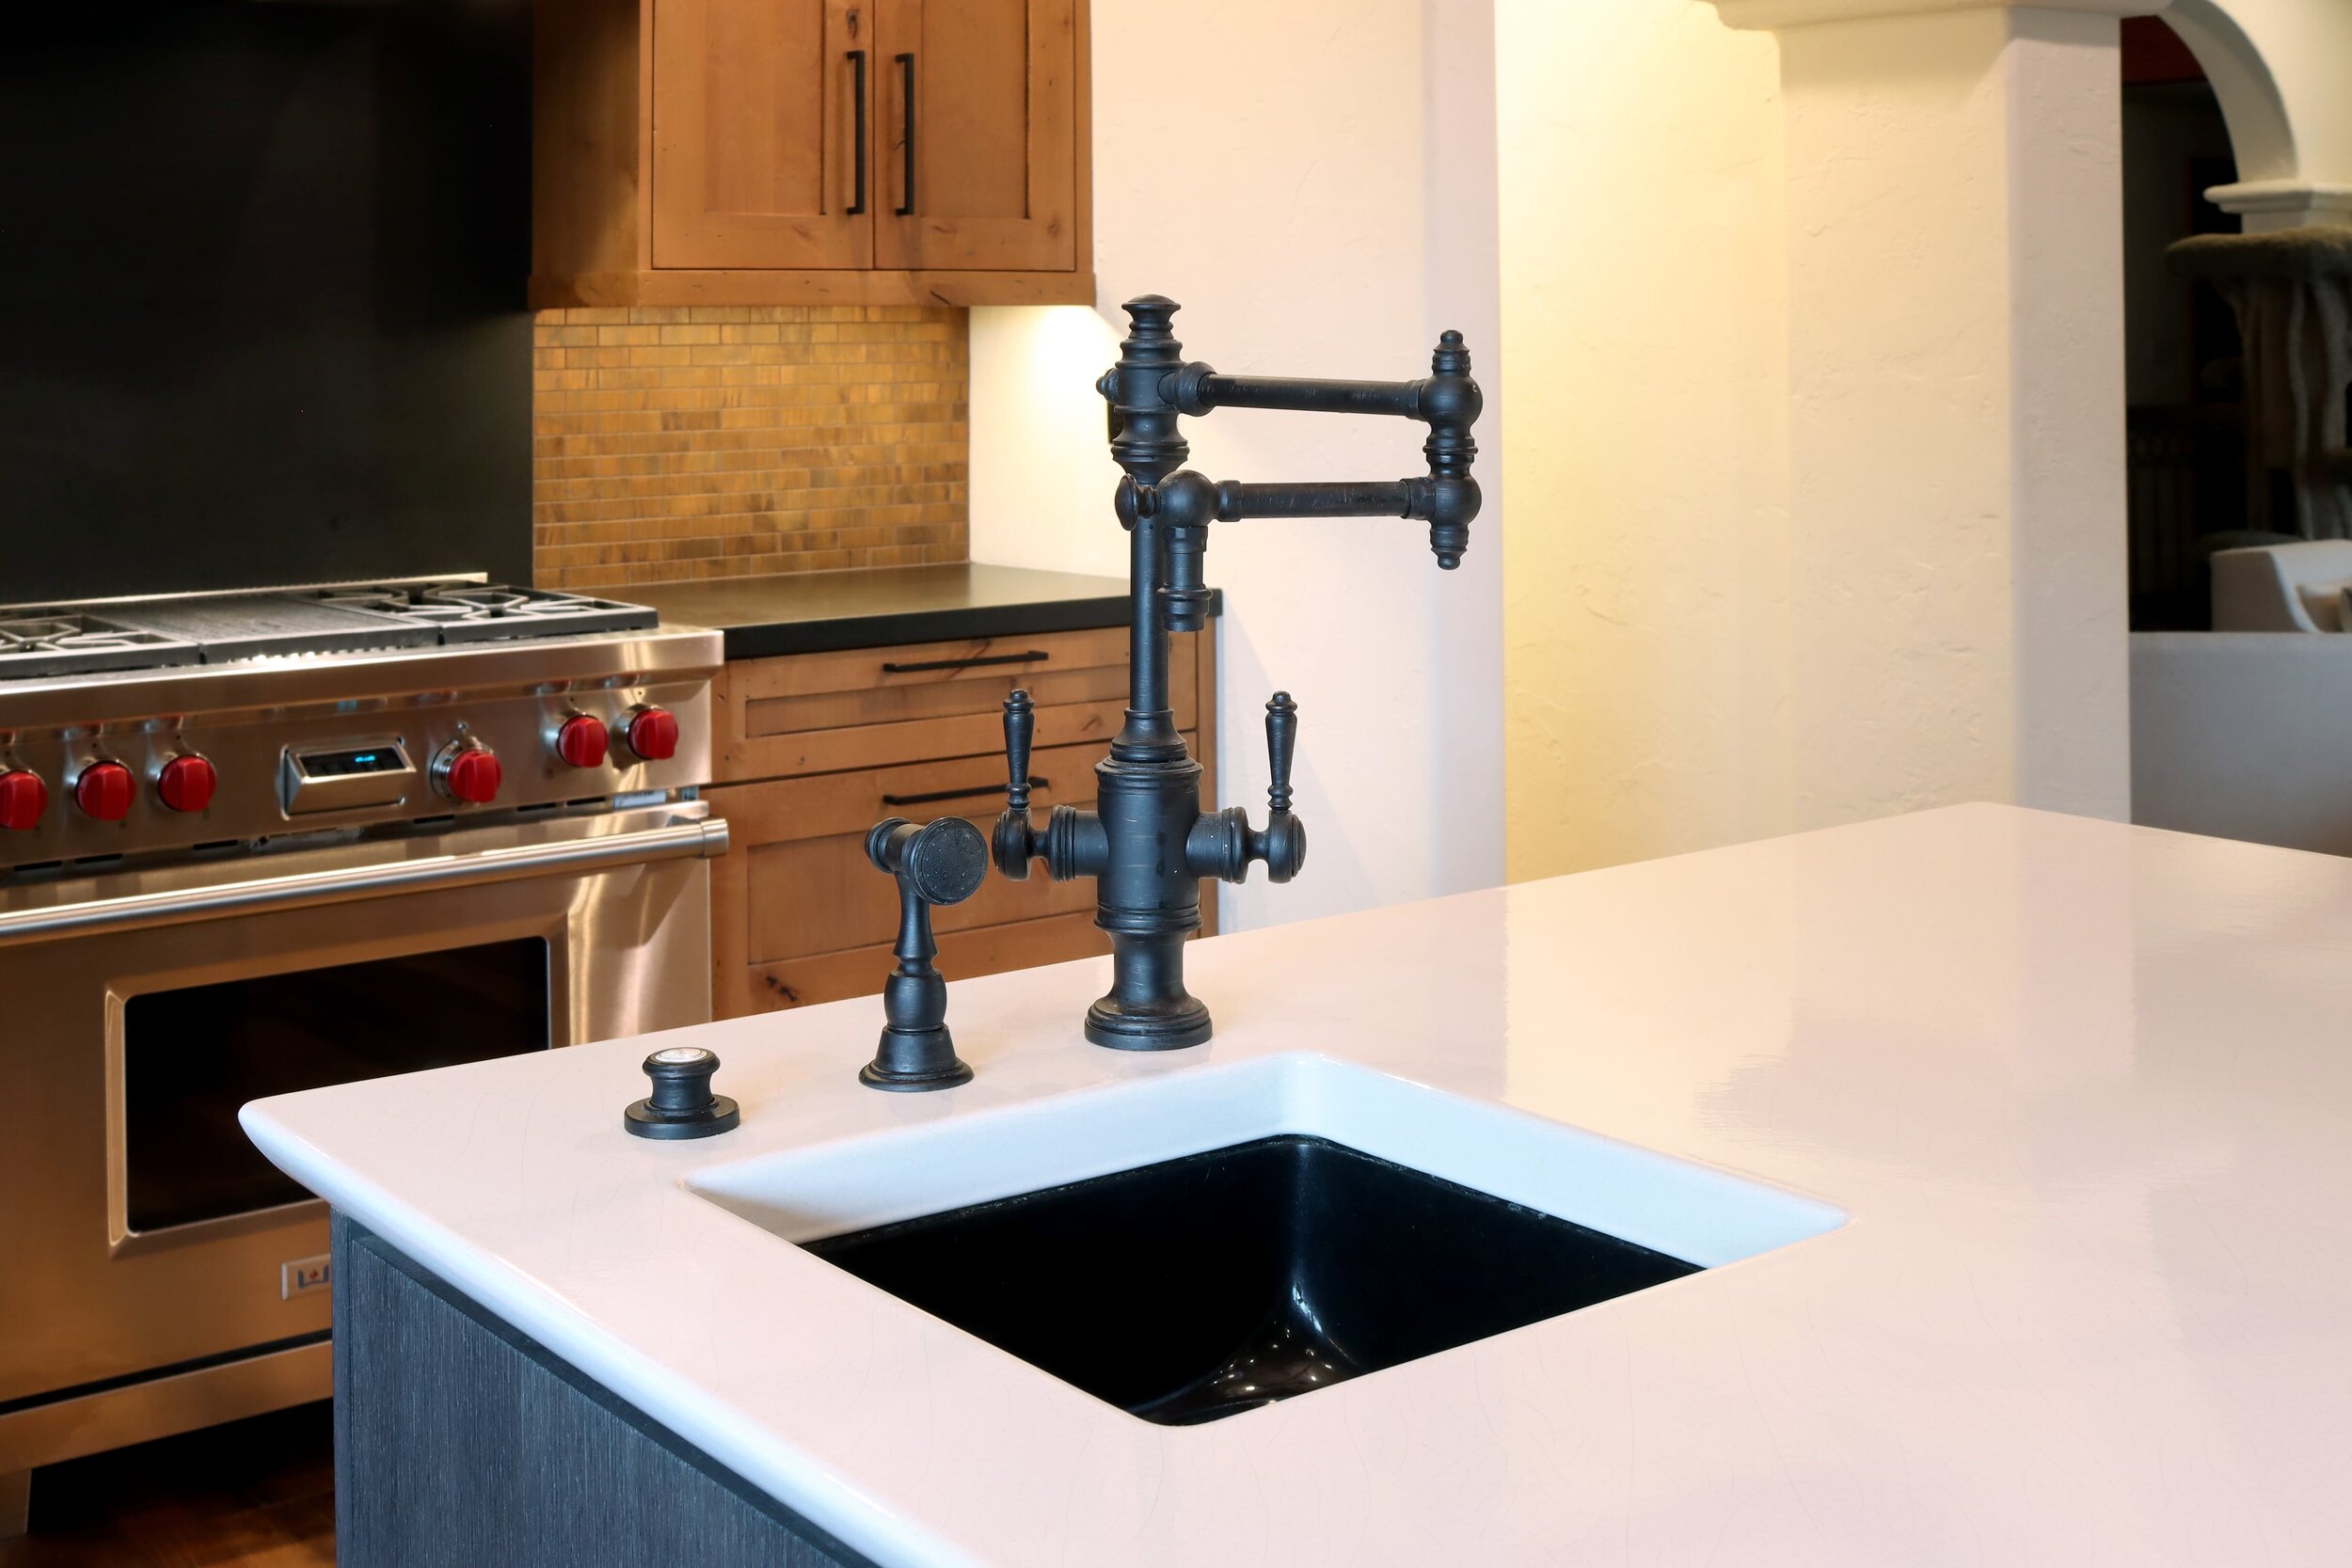 The mini kitchen has most things needed for light cooking, and you can  request an electric cookt - Picture of Home2 Suites by Hilton Las Cruces -  Tripadvisor